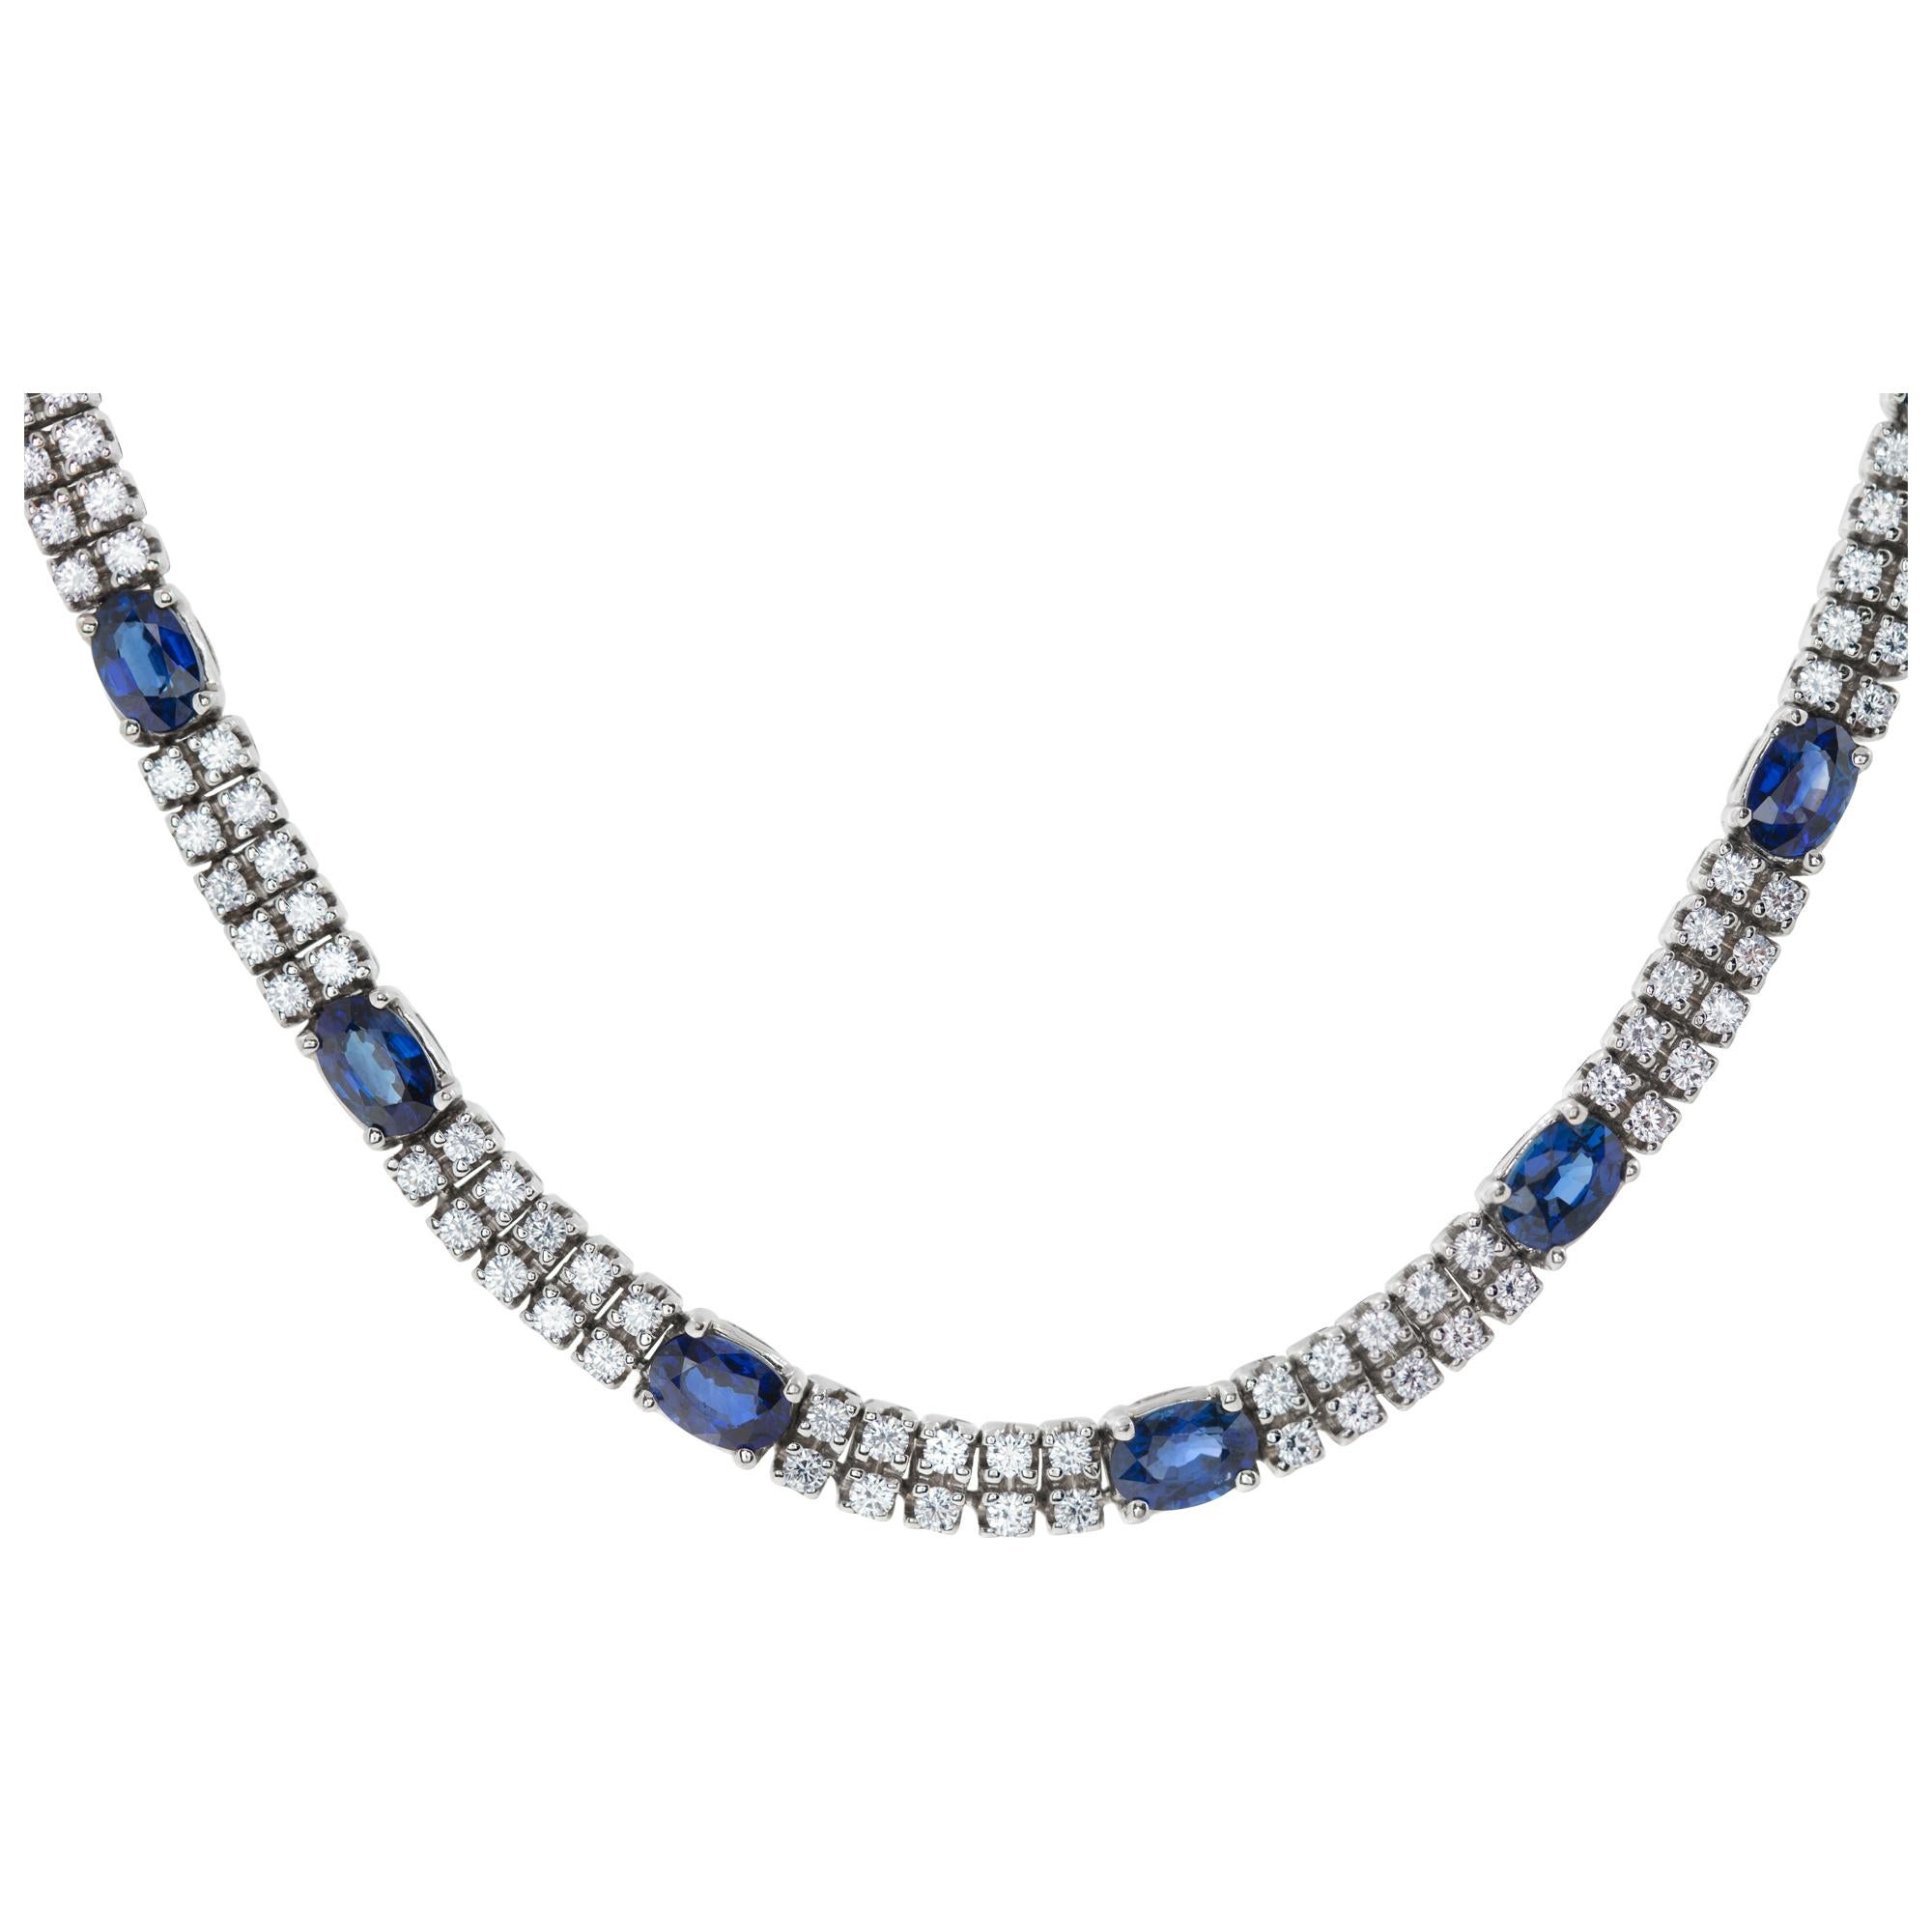 Double row tennis necklace with diamonds and oval sapphires in 18k white gold. Diamonds  approx. 11.50 carats F-G color, VS clarity and blue oval sapphires approx. 6 carats. Necklace 17 inches long and 4.4 mm width.
